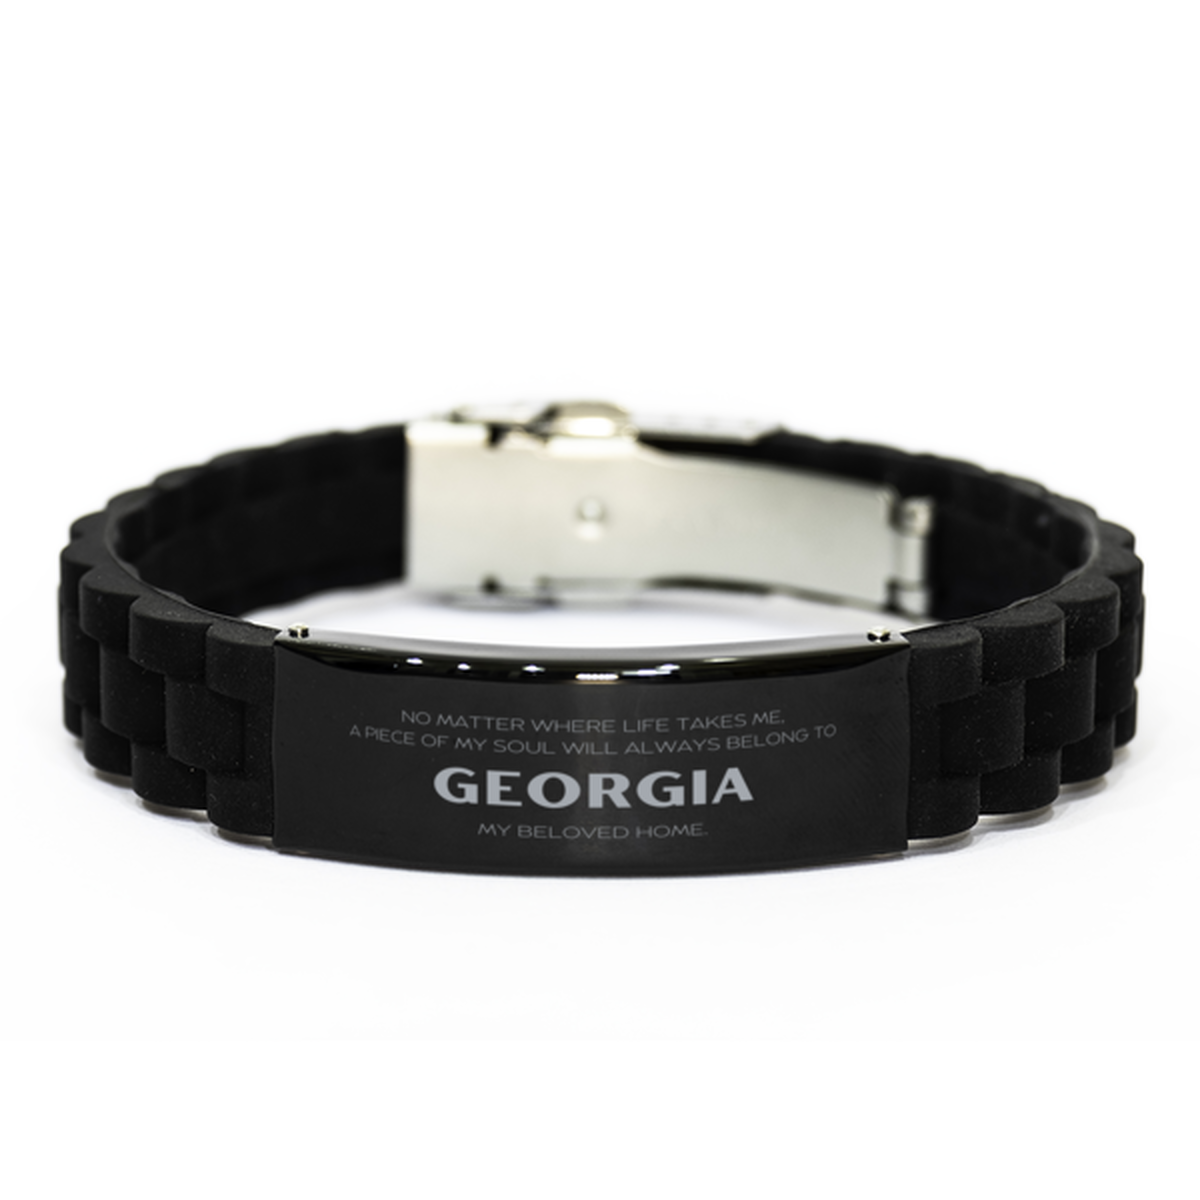 Love Georgia State Gifts, My soul will always belong to Georgia, Proud Black Glidelock Clasp Bracelet, Birthday Unique Gifts For Georgia Men, Women, Friends